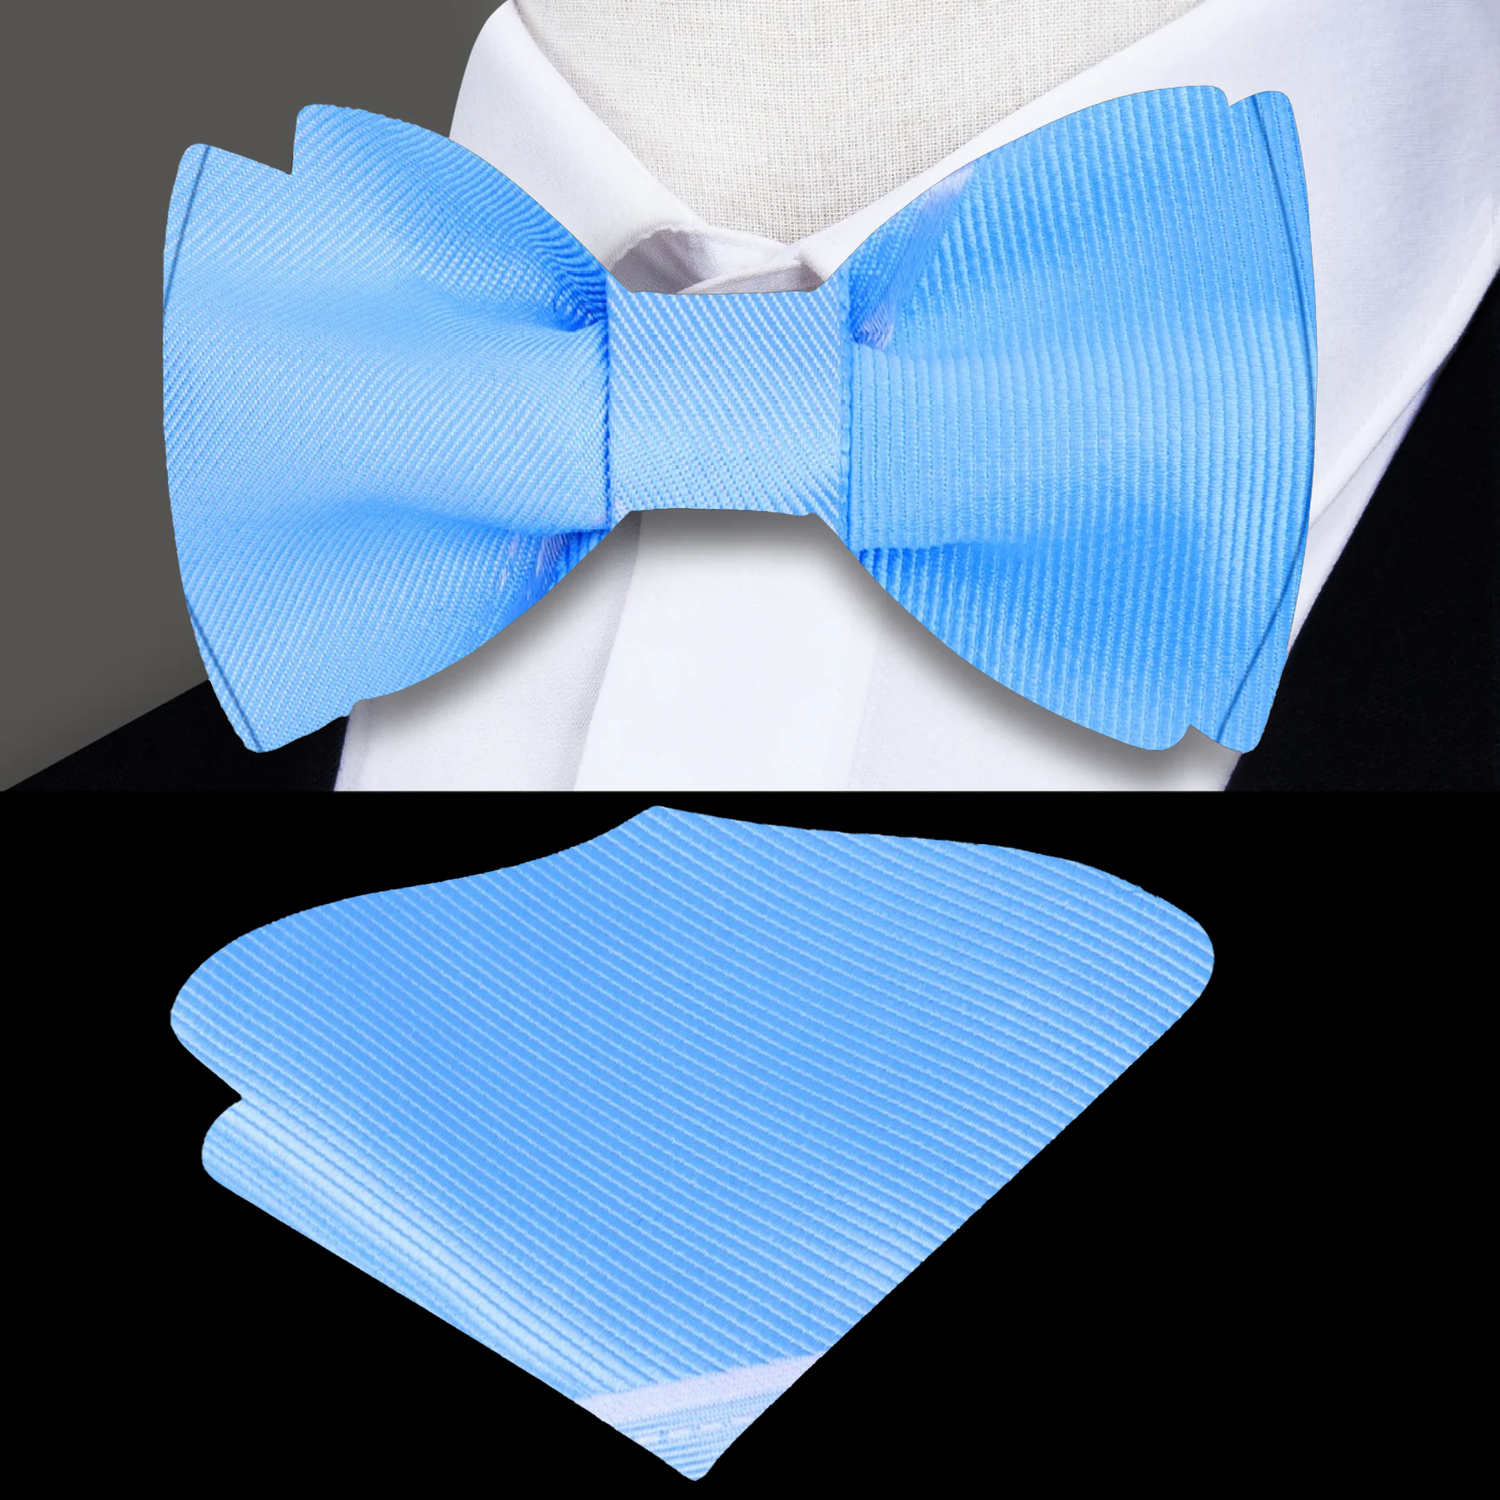 A Light Blue, White Vertical Lined Pattern Silk Self Tie Bow Tie, Matching Pocket Square